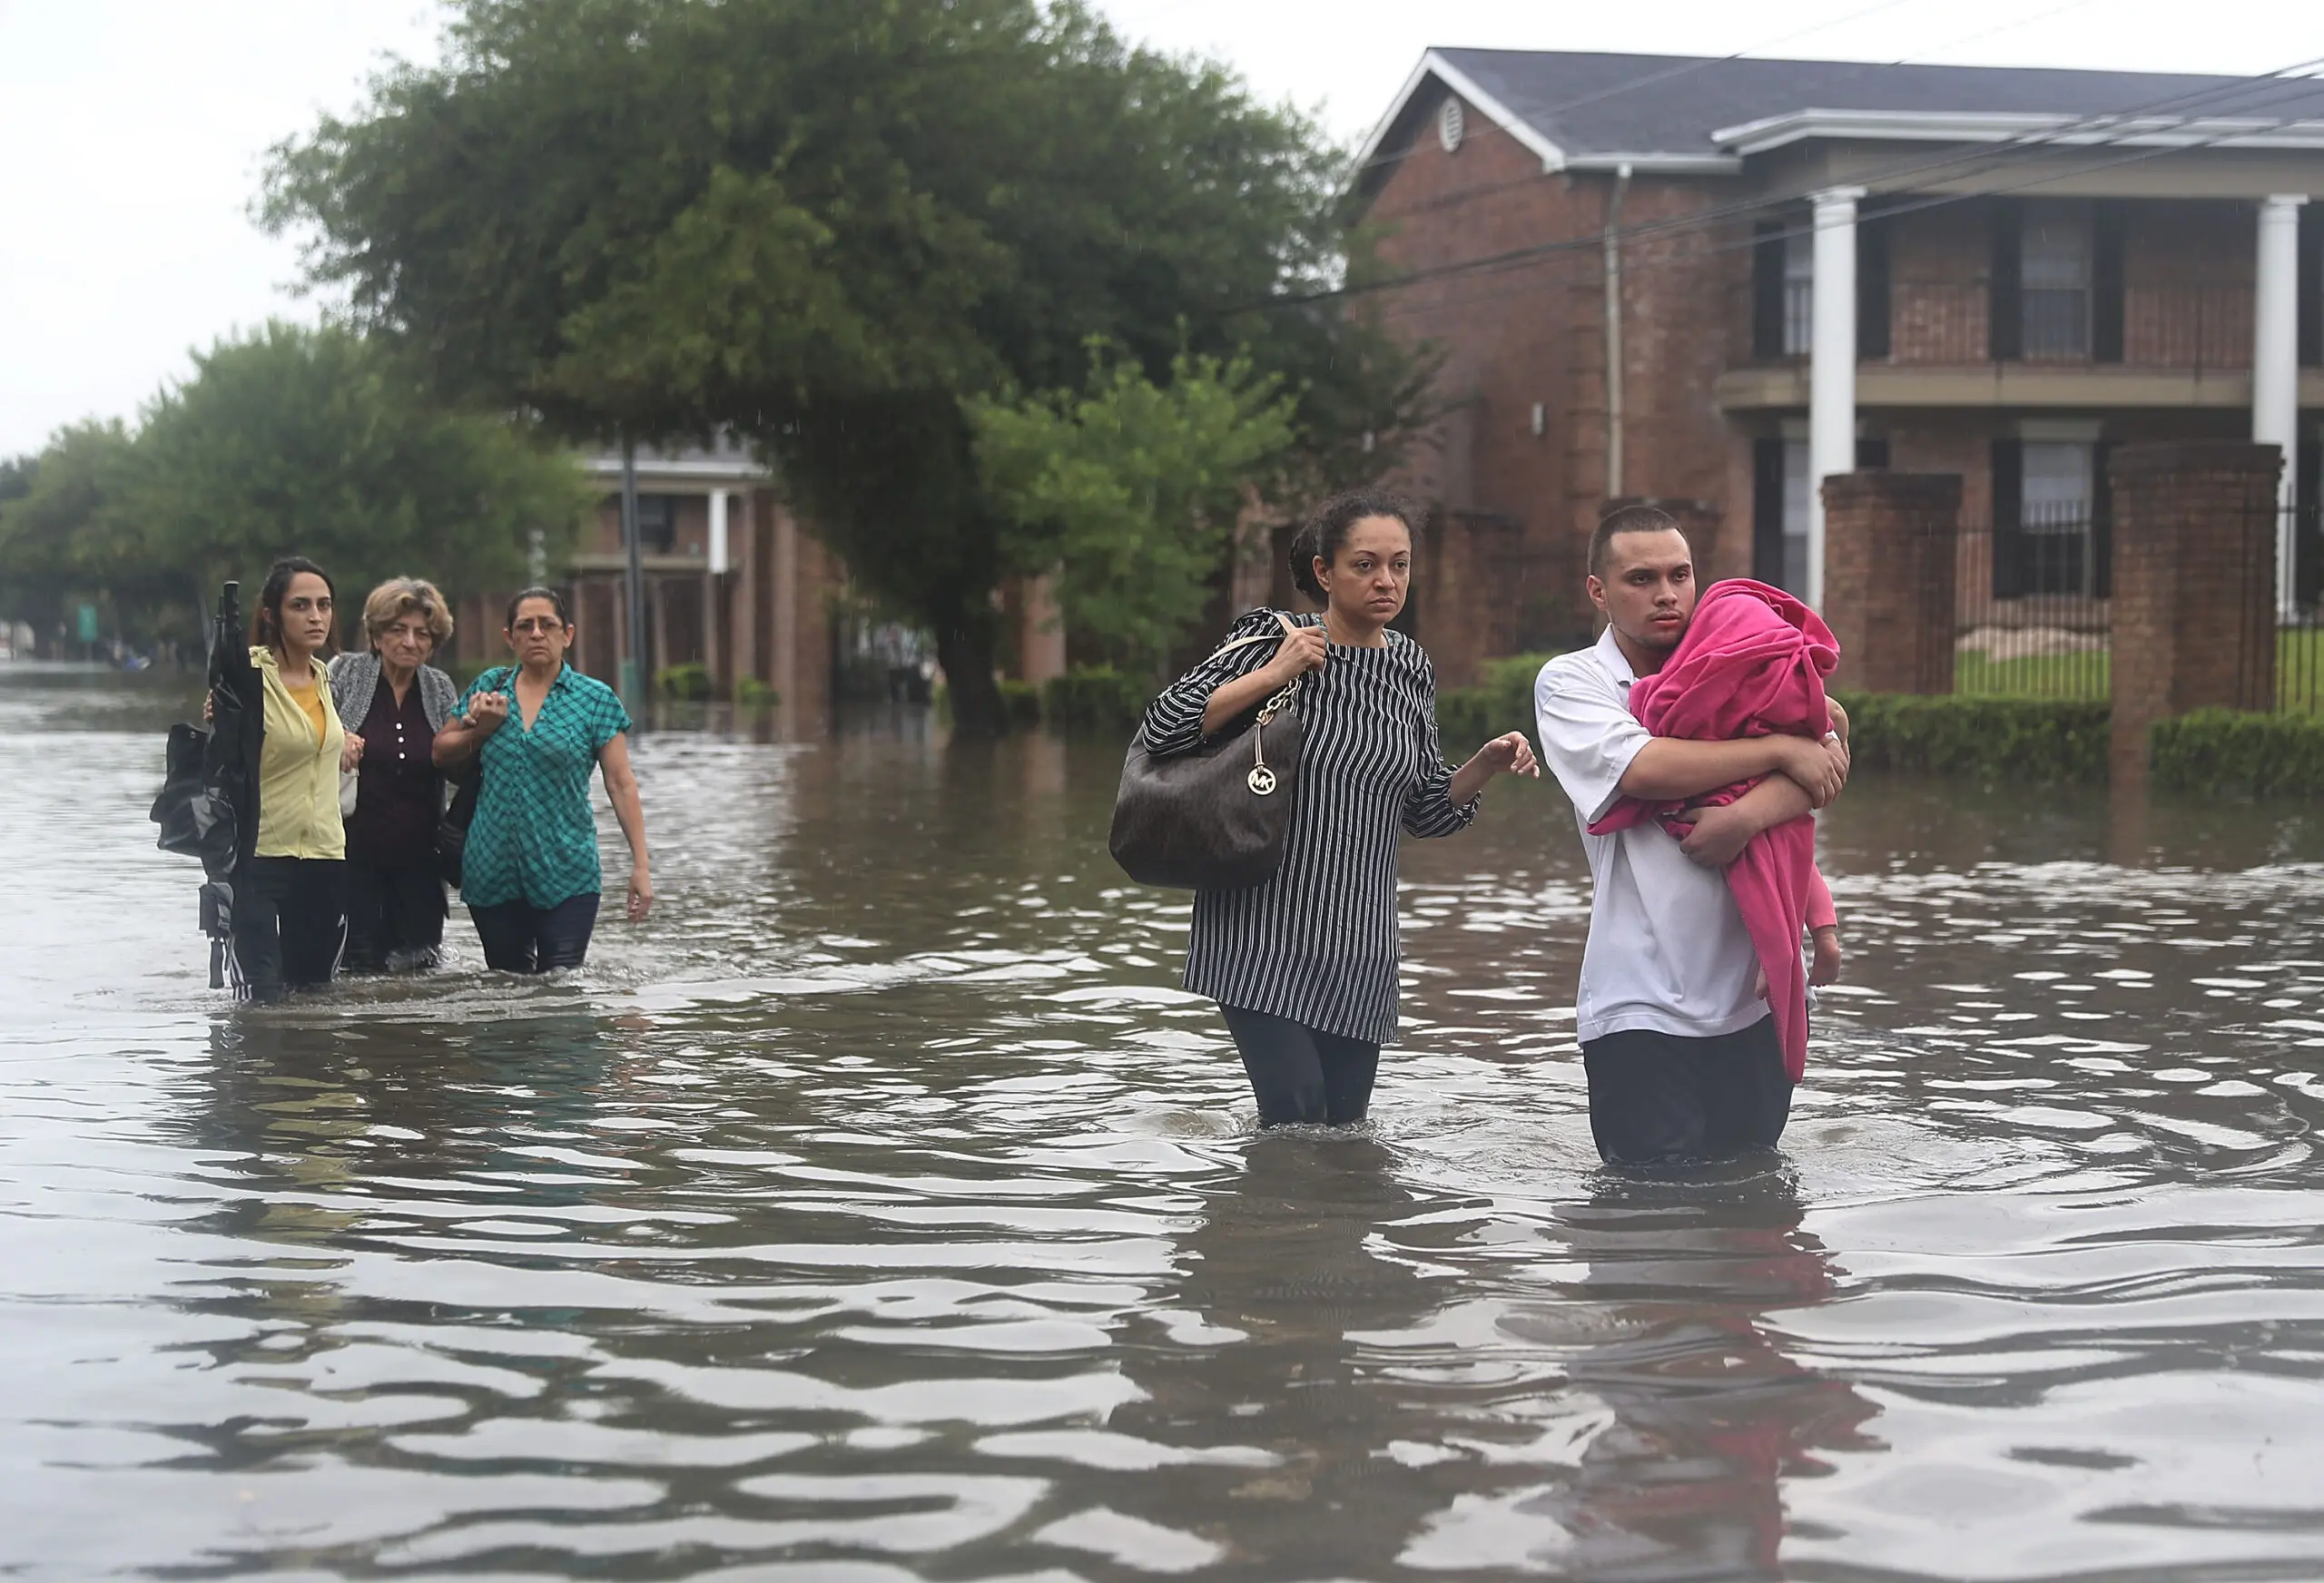 hewlett packard employee assistance fund for houston flood victims - What is the HP Foundation